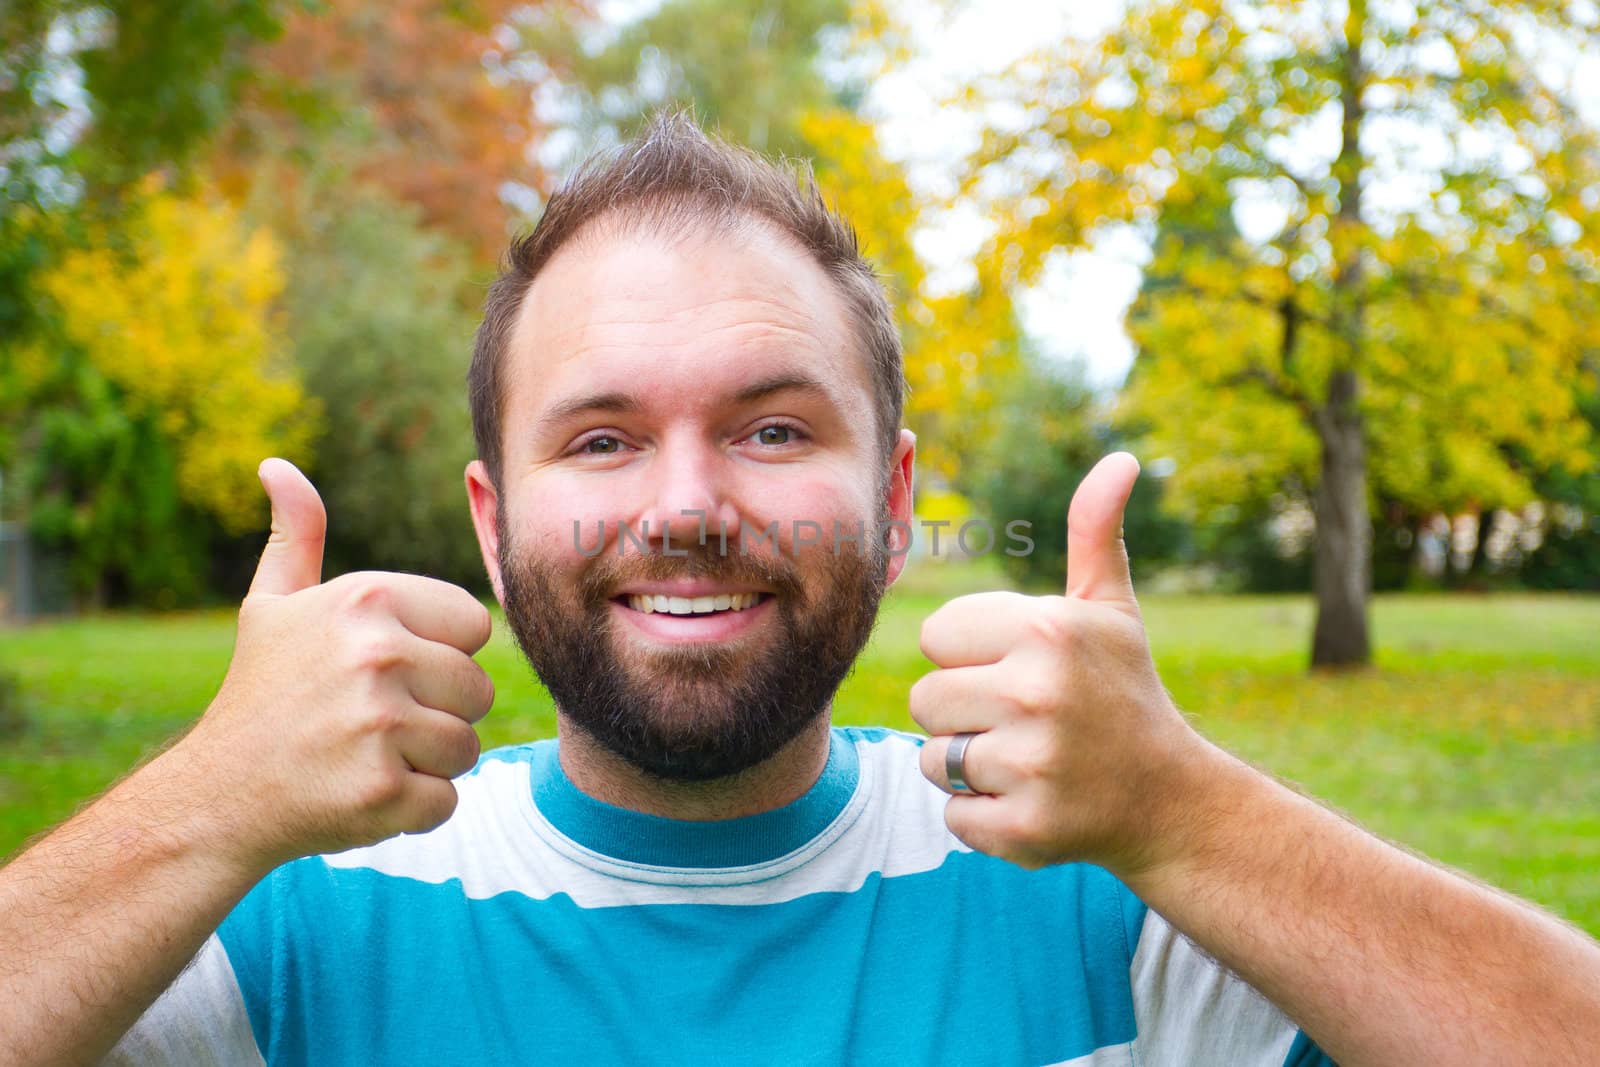 A man with a full beard gives the camera a double thumgs up with both hands while outdoors in a park setting.